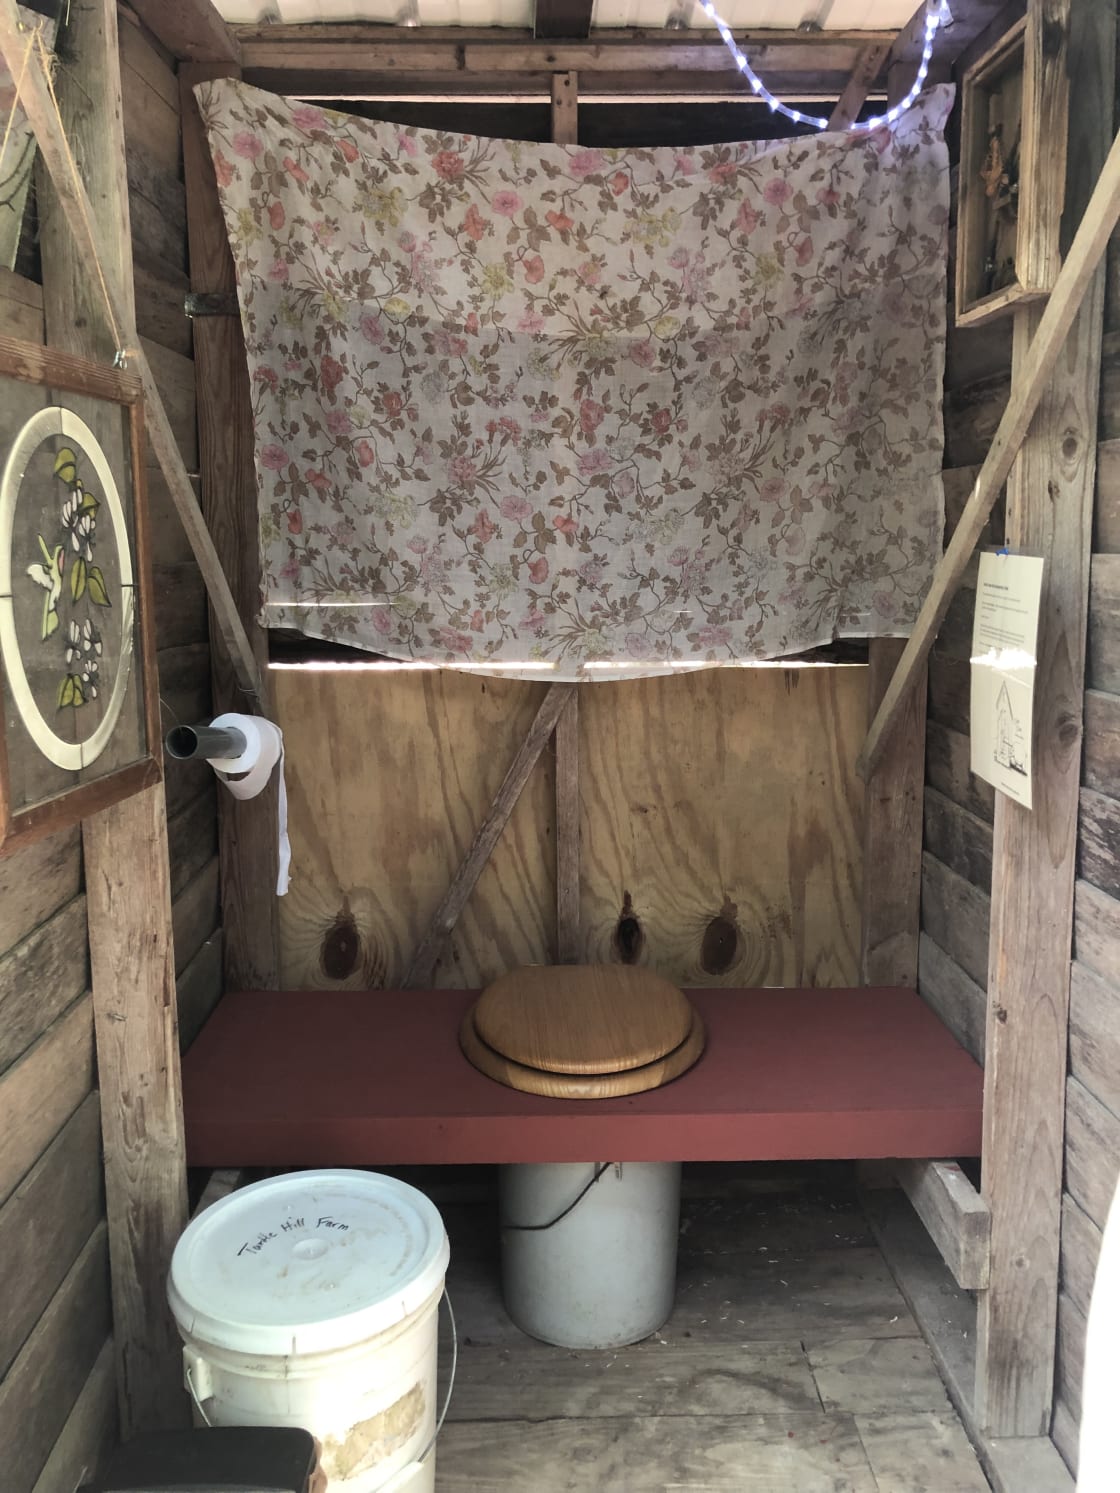 Shared composting toilet/outhouse